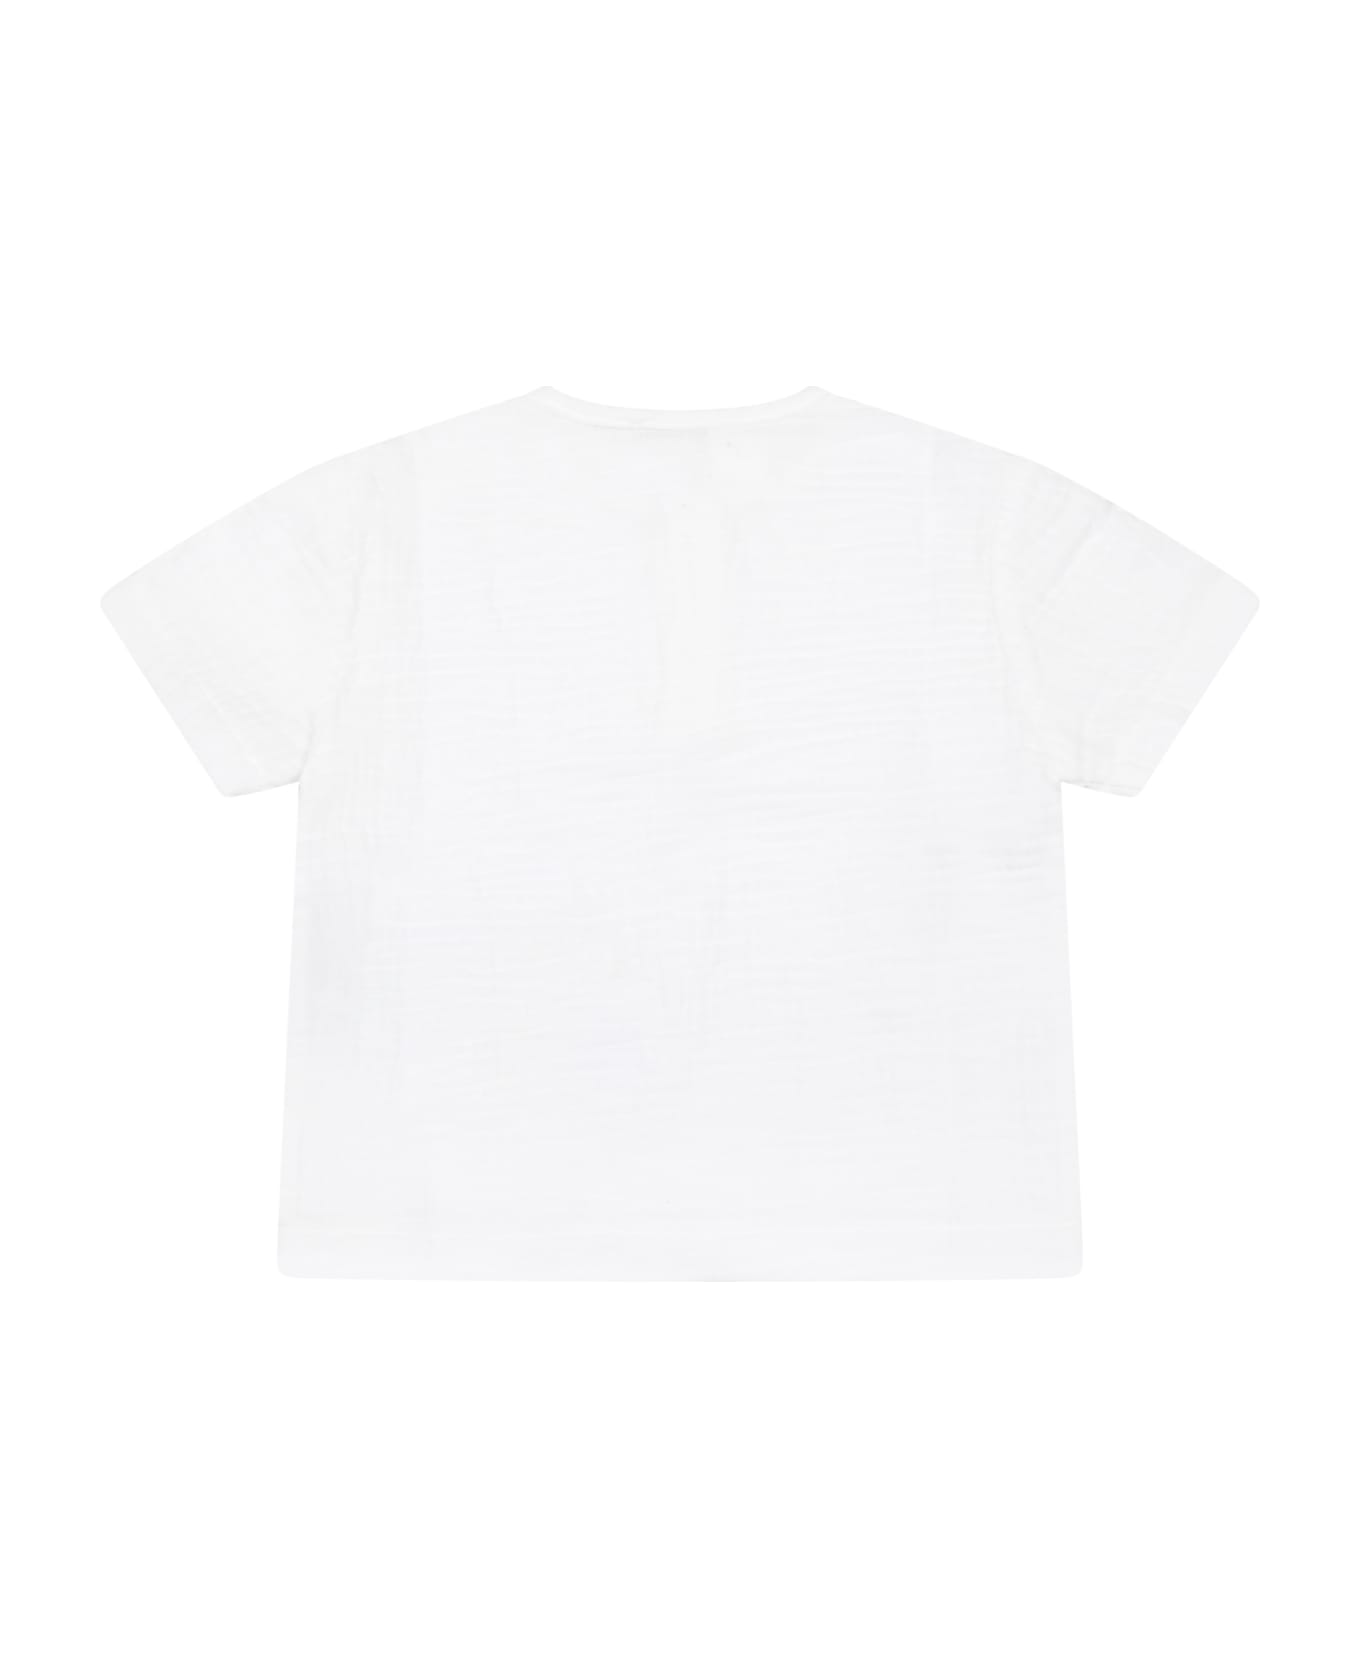 Le Petit Coco Beige T-shirt For Baby Kids - White シャツ